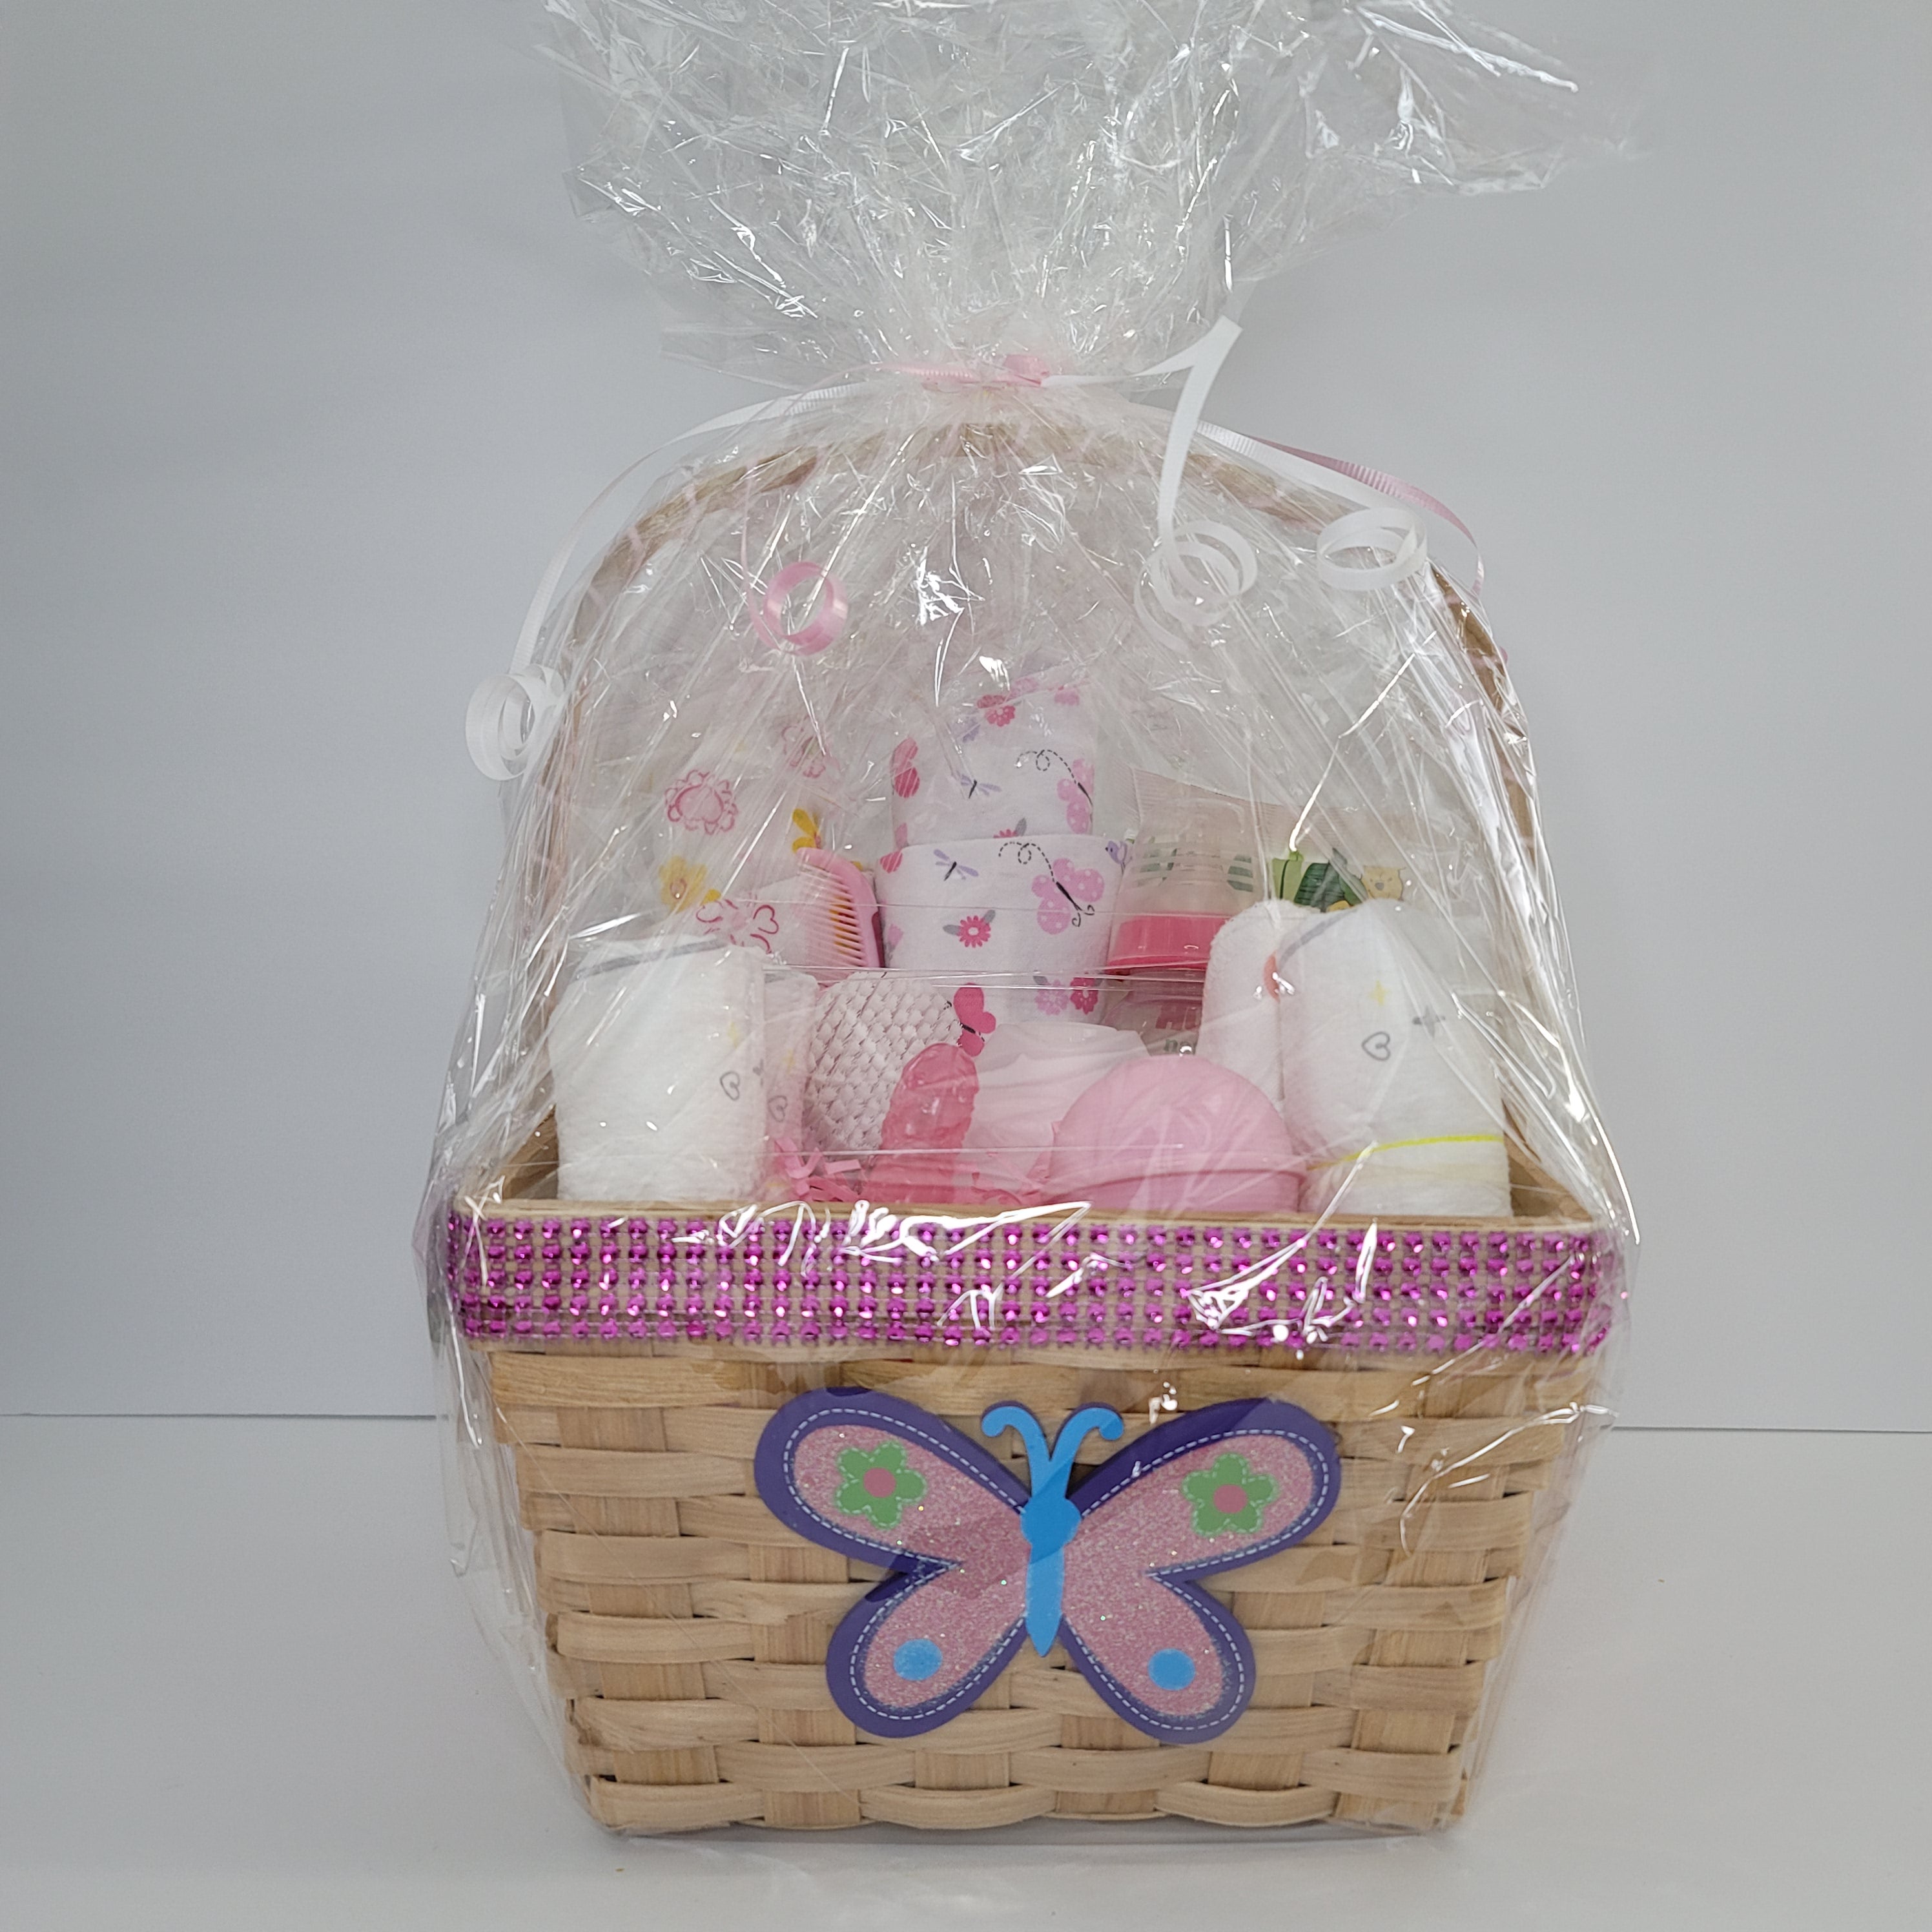 Baby Or Babe|customizable Gift Hamper For All Occasions - Baby Shower,  Gender Reveal, Birthdays